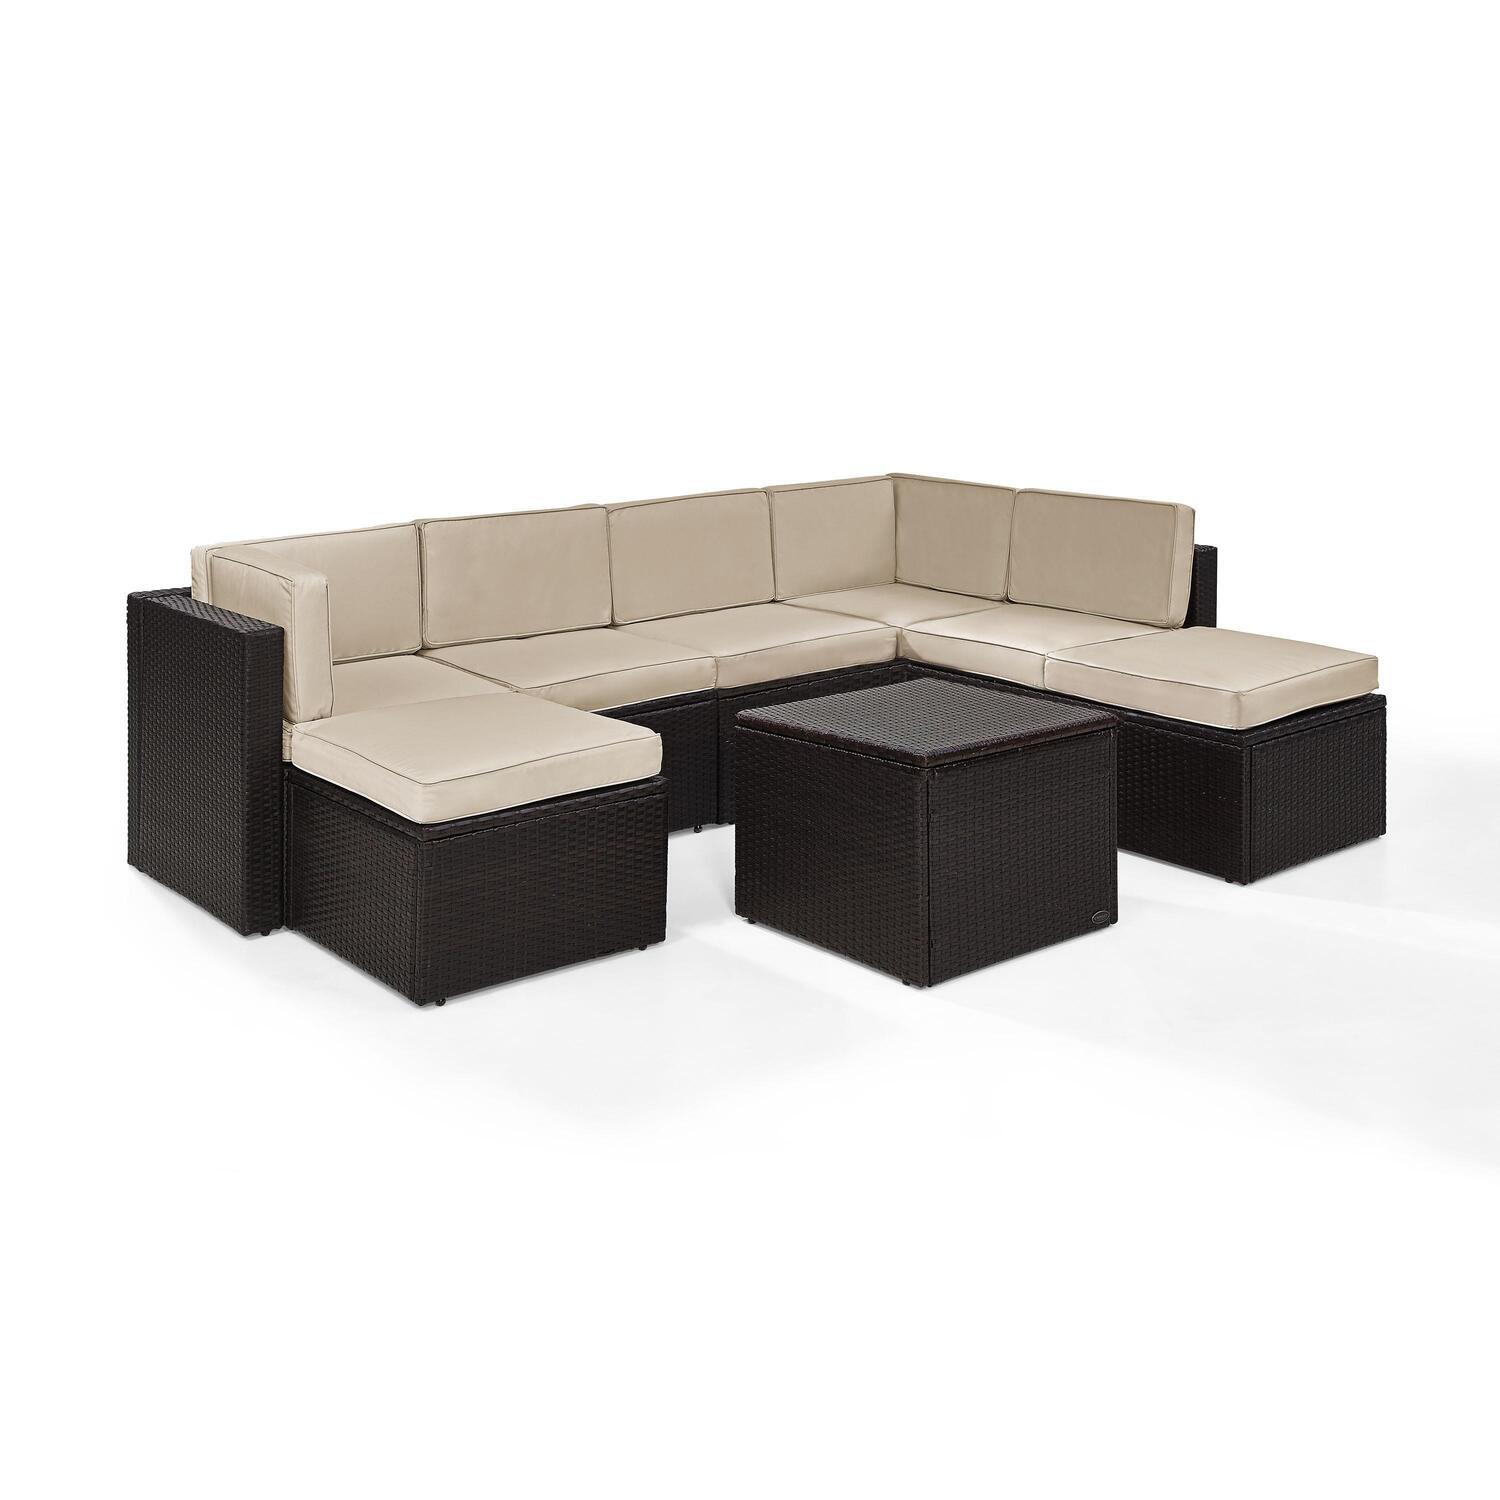 Crosley Palm Harbor 8 Piece Wicker Patio Sectional Set in Brown and Sand - image 1 of 6